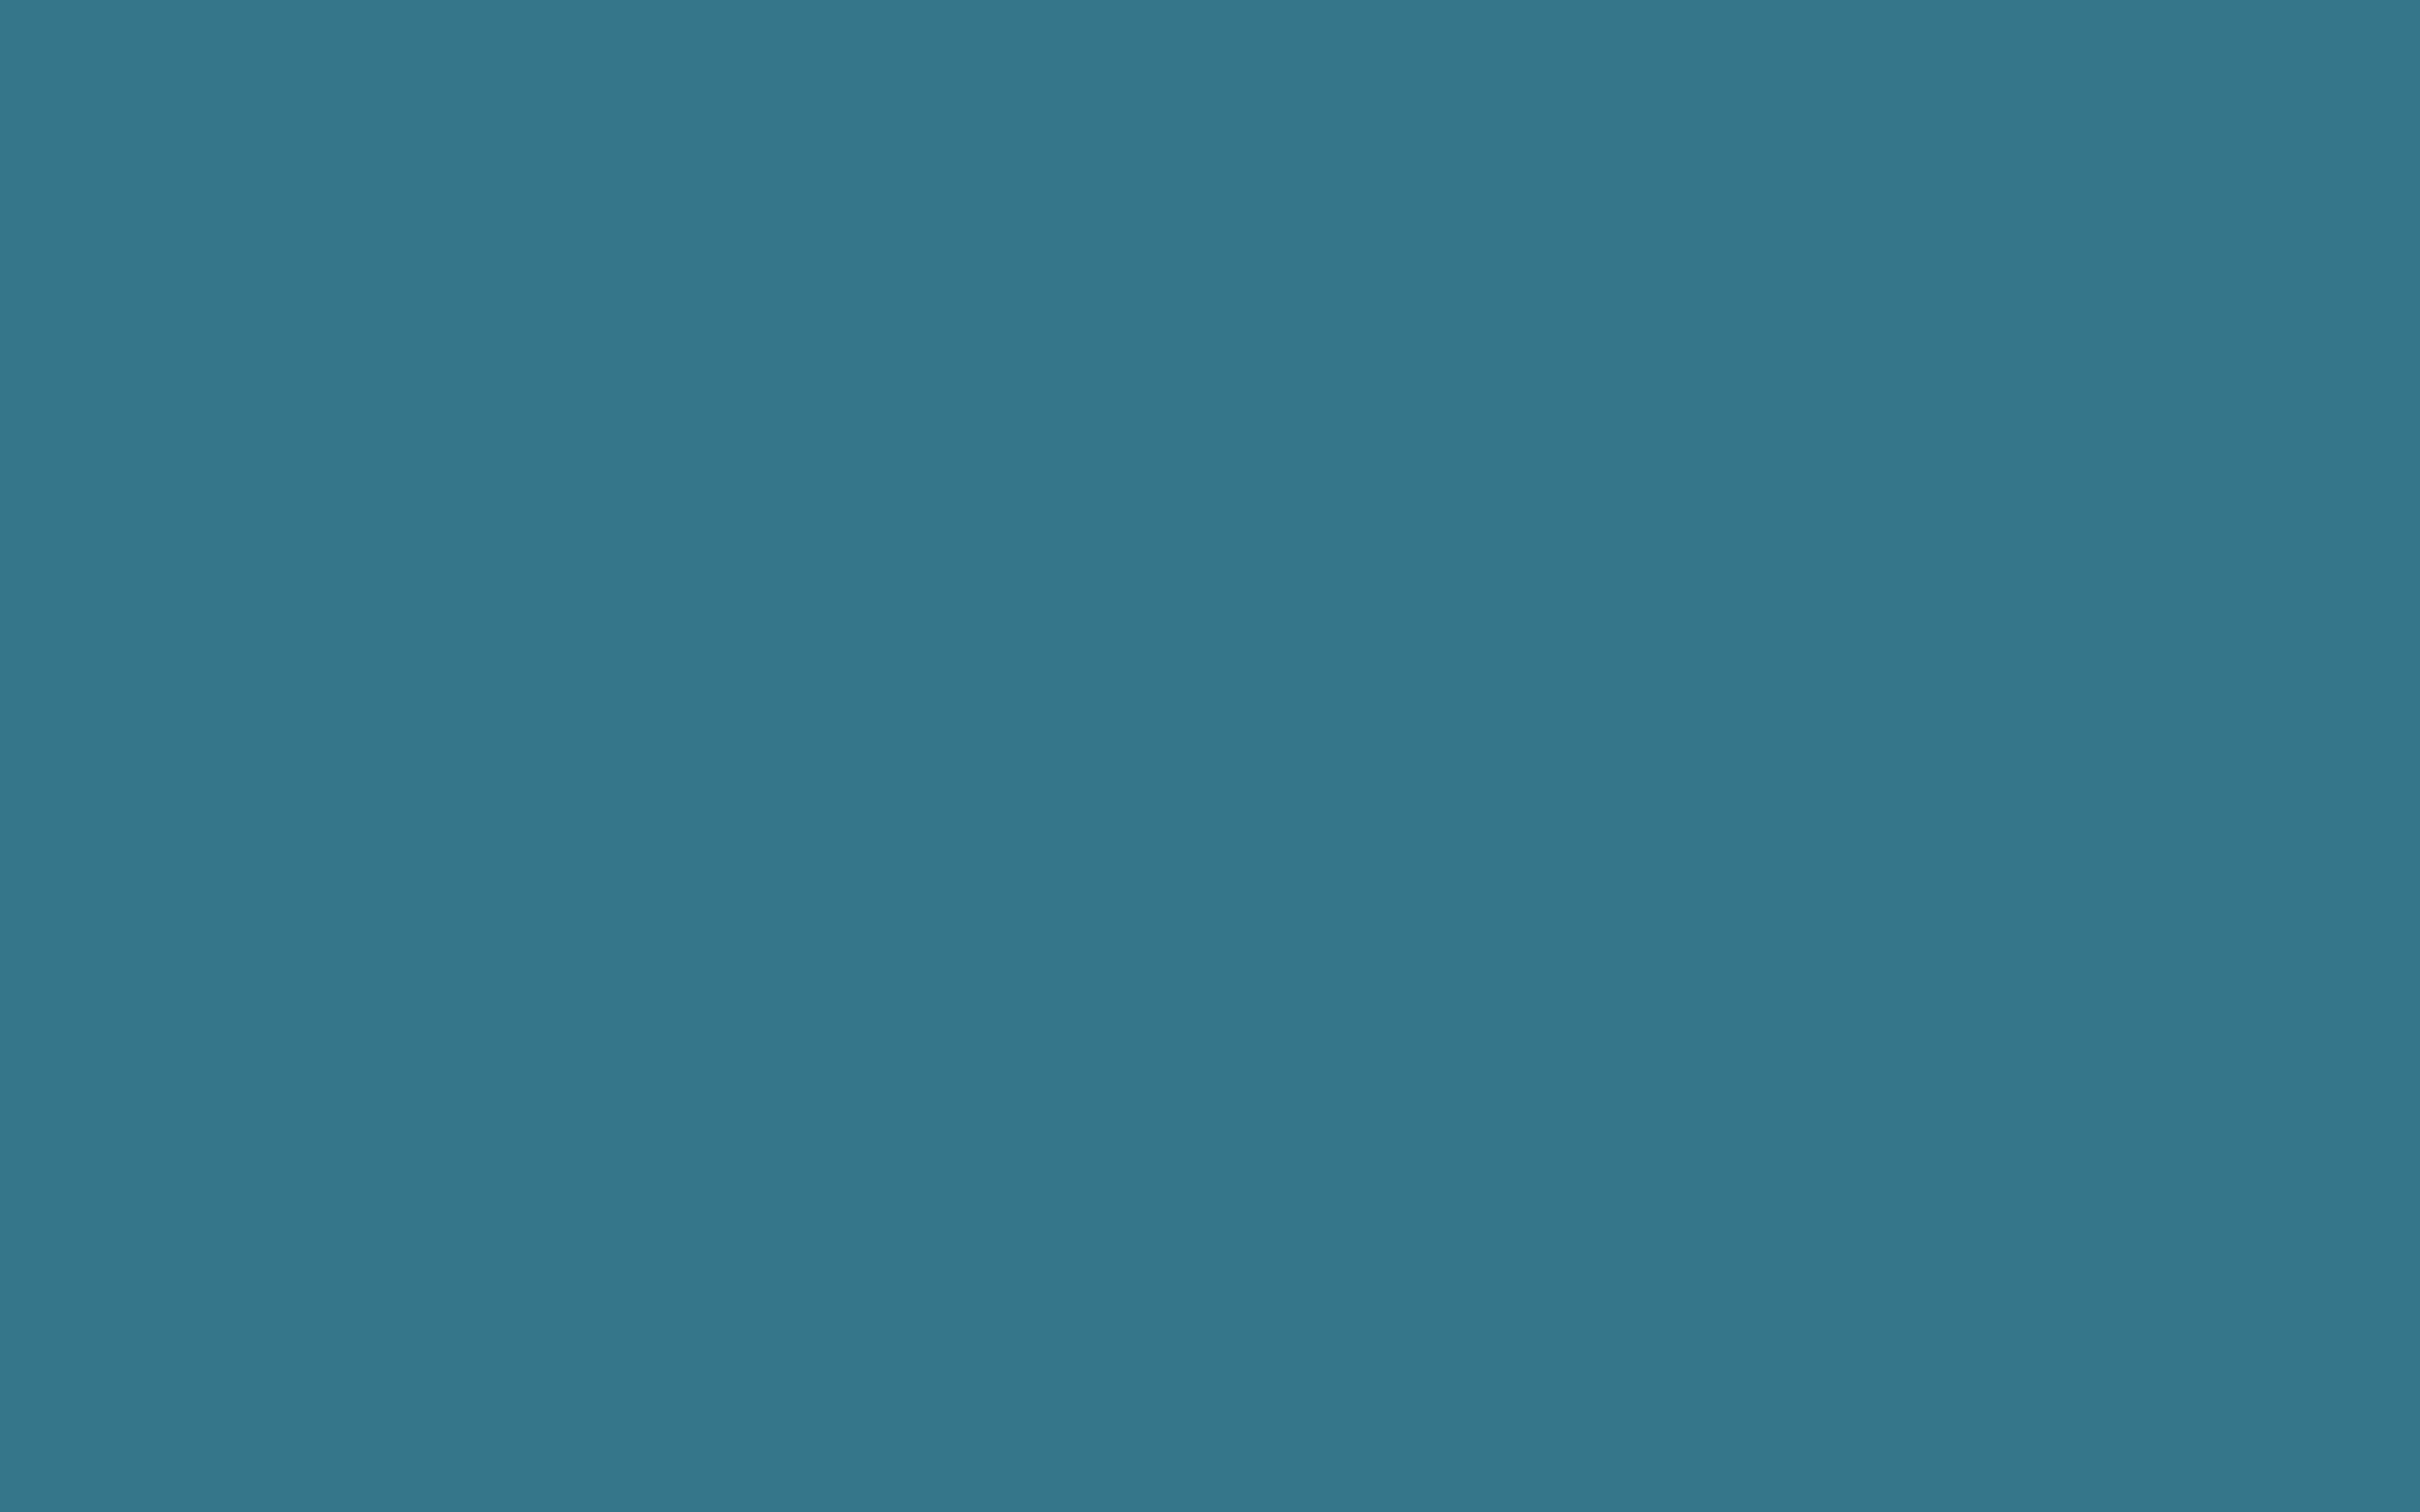 2560x1600 Teal Blue Solid Color Background 2560x1600